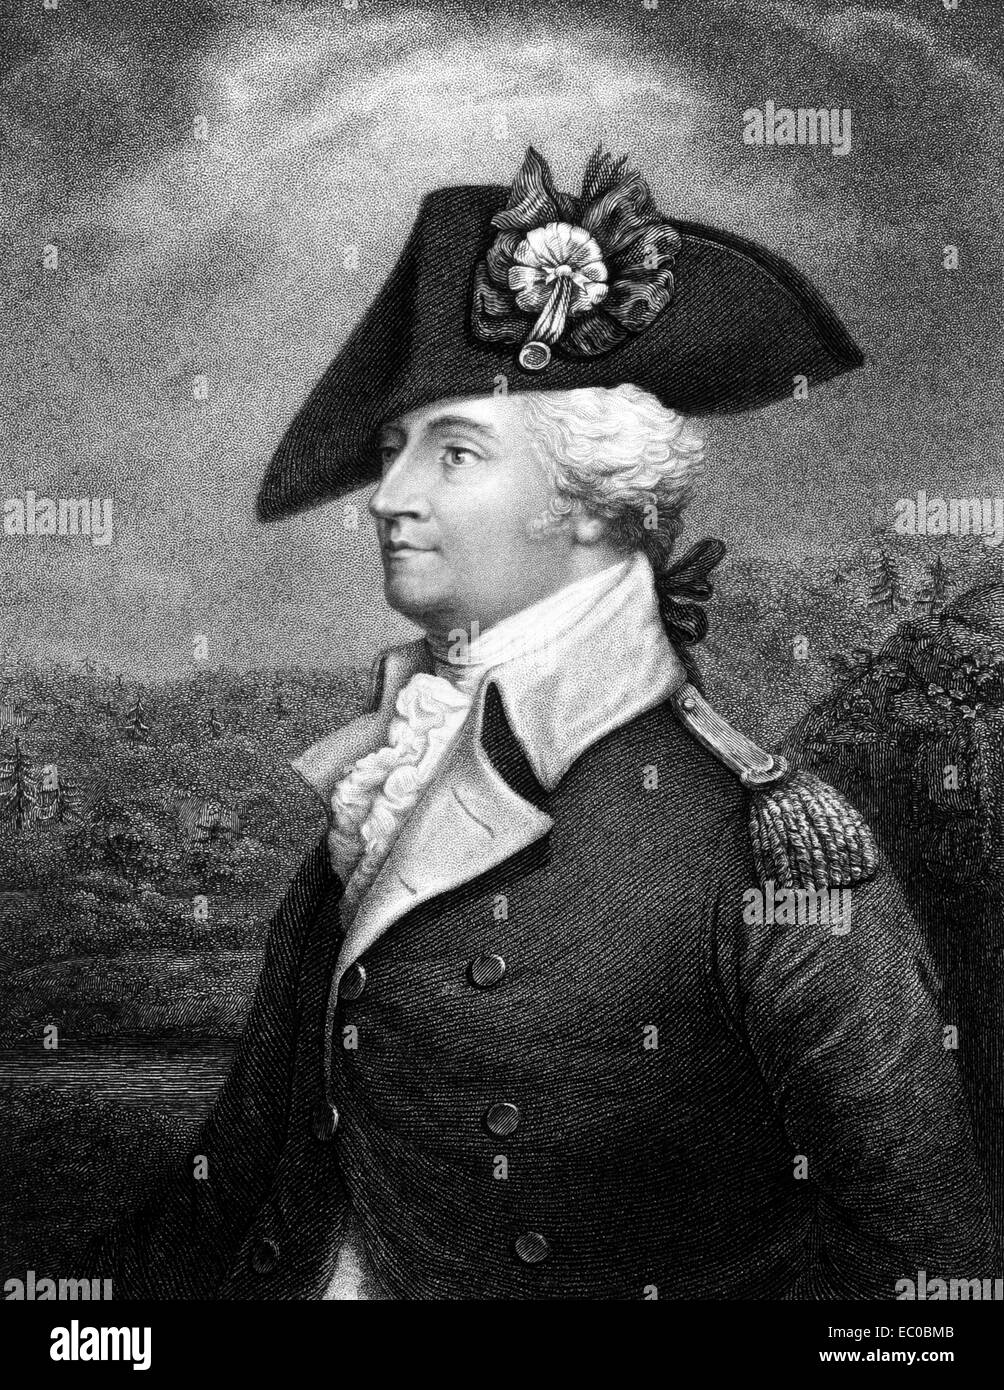 Anthony Wayne (1745-1796) on engraving from 1834.  United States Army officer and statesman. Stock Photo